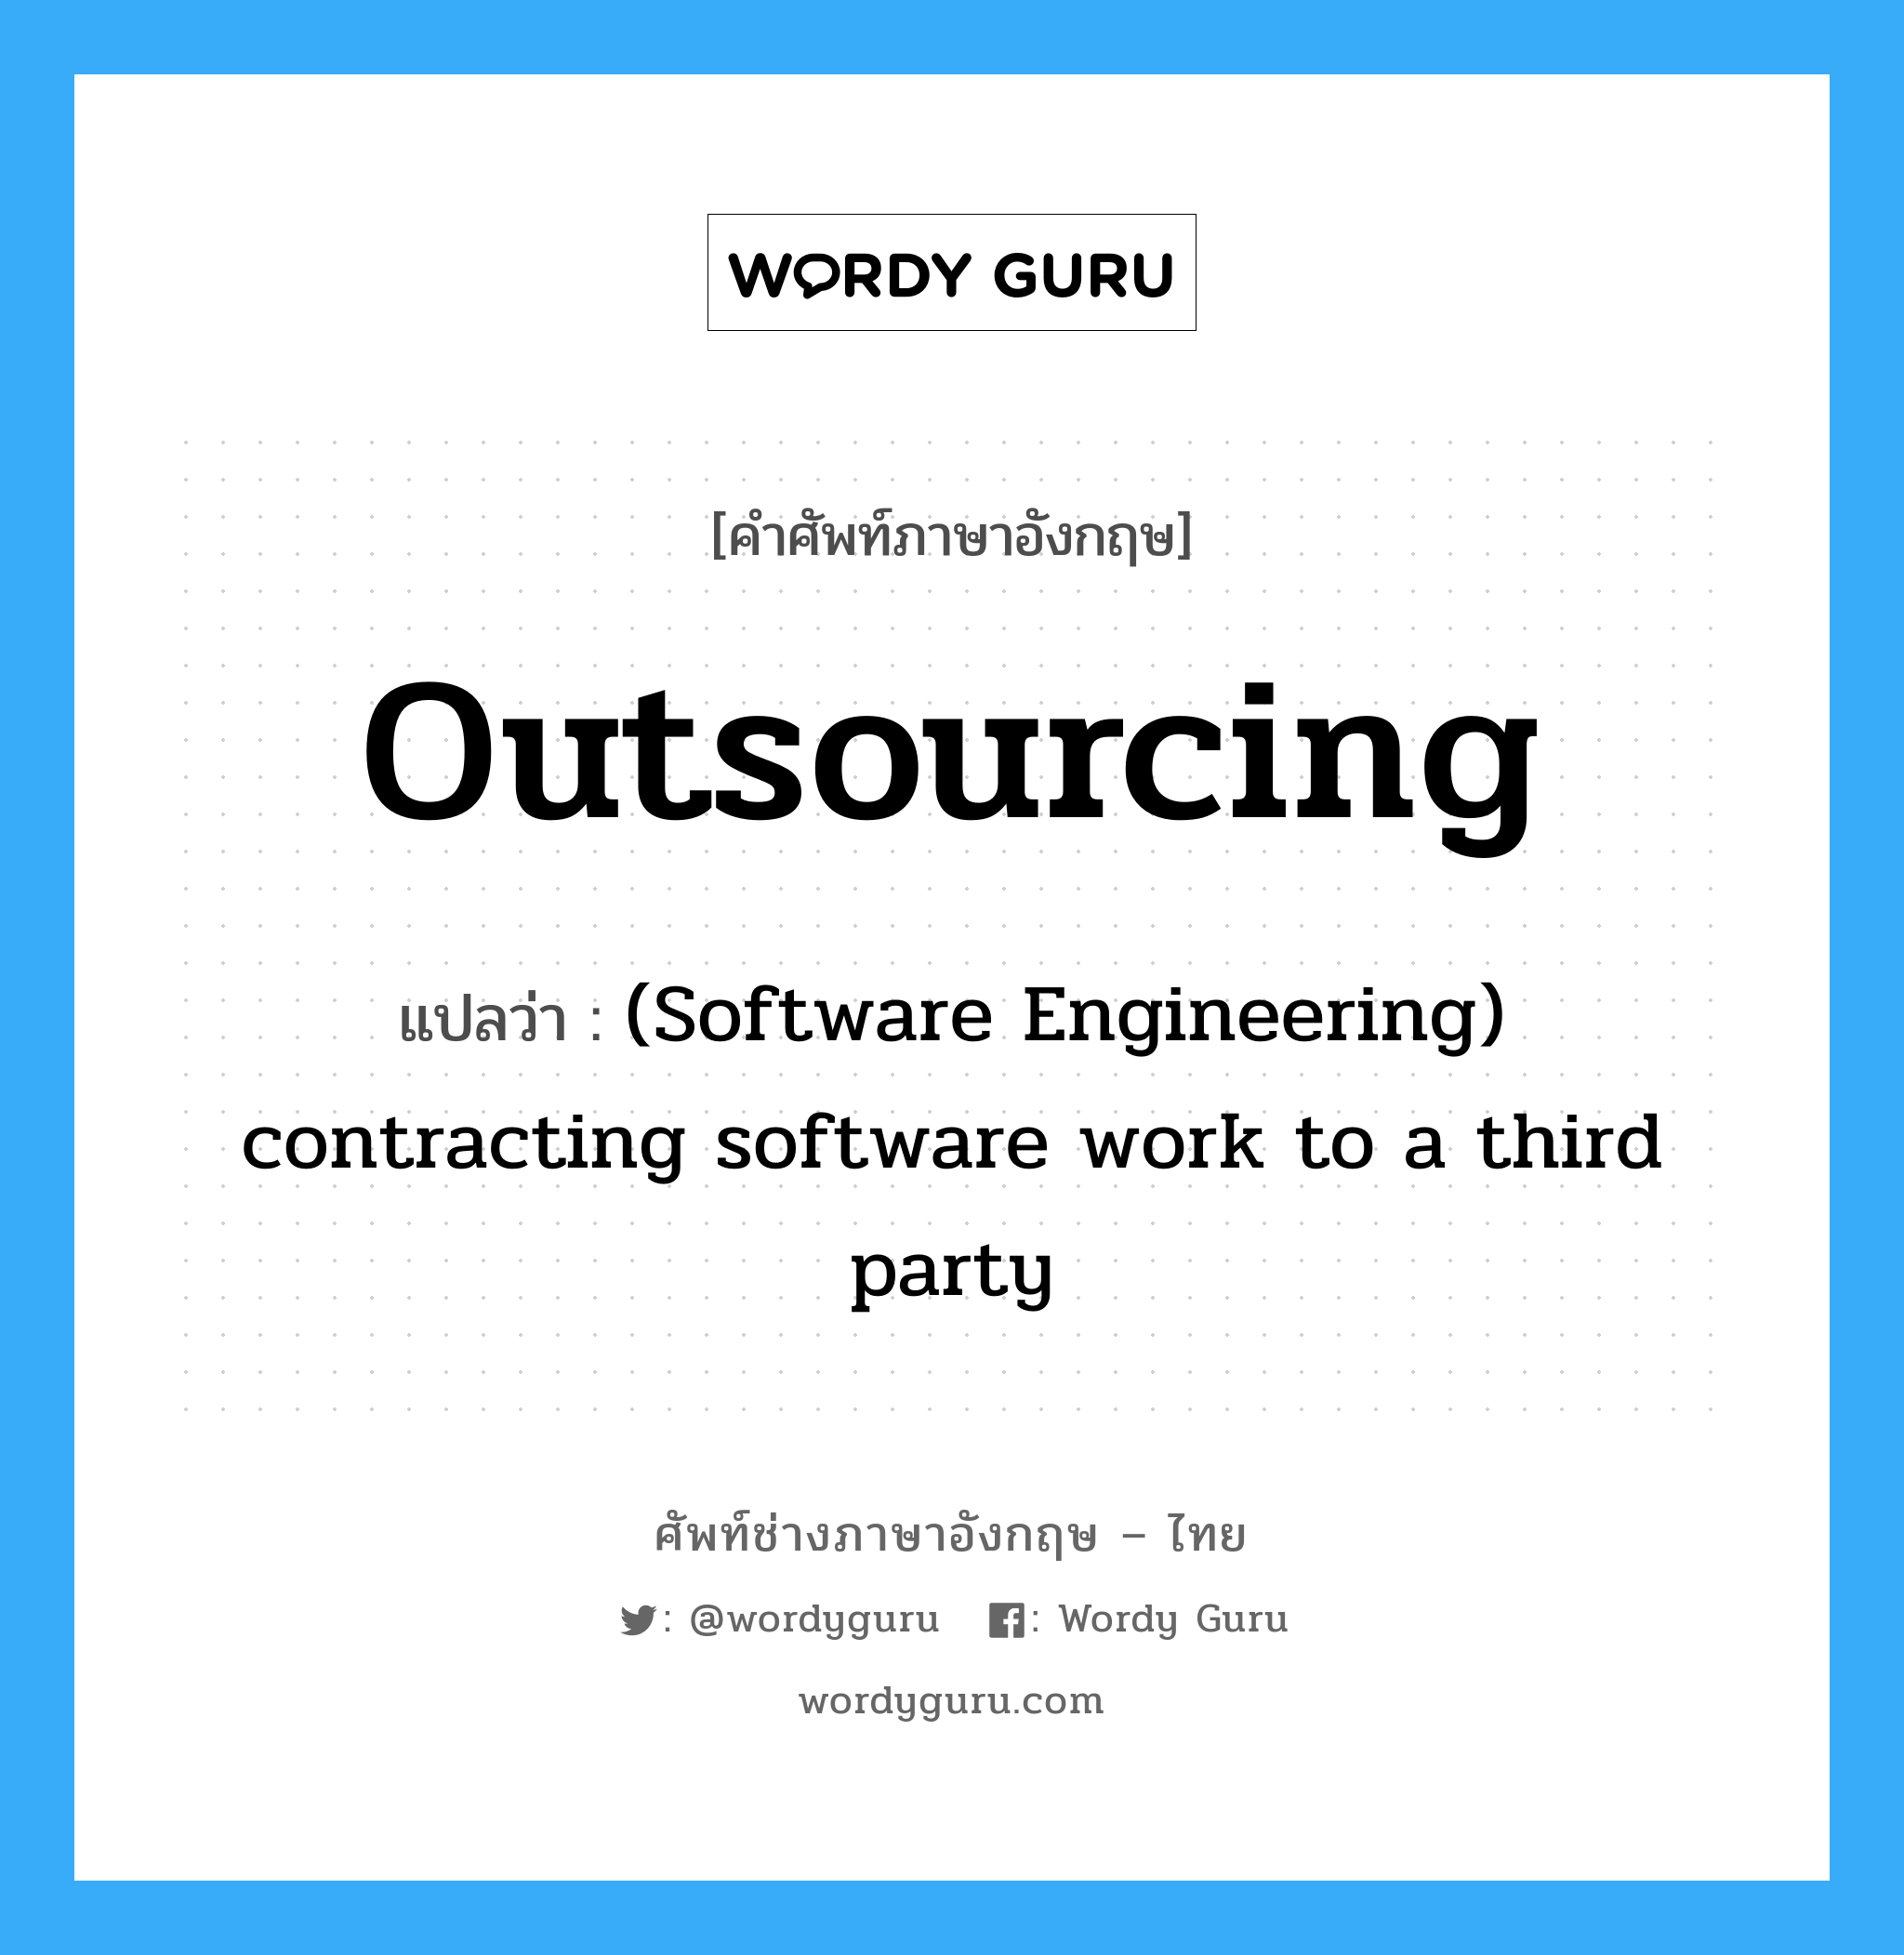 Outsourcing แปลว่า?, คำศัพท์ช่างภาษาอังกฤษ - ไทย Outsourcing คำศัพท์ภาษาอังกฤษ Outsourcing แปลว่า (Software Engineering) contracting software work to a third party